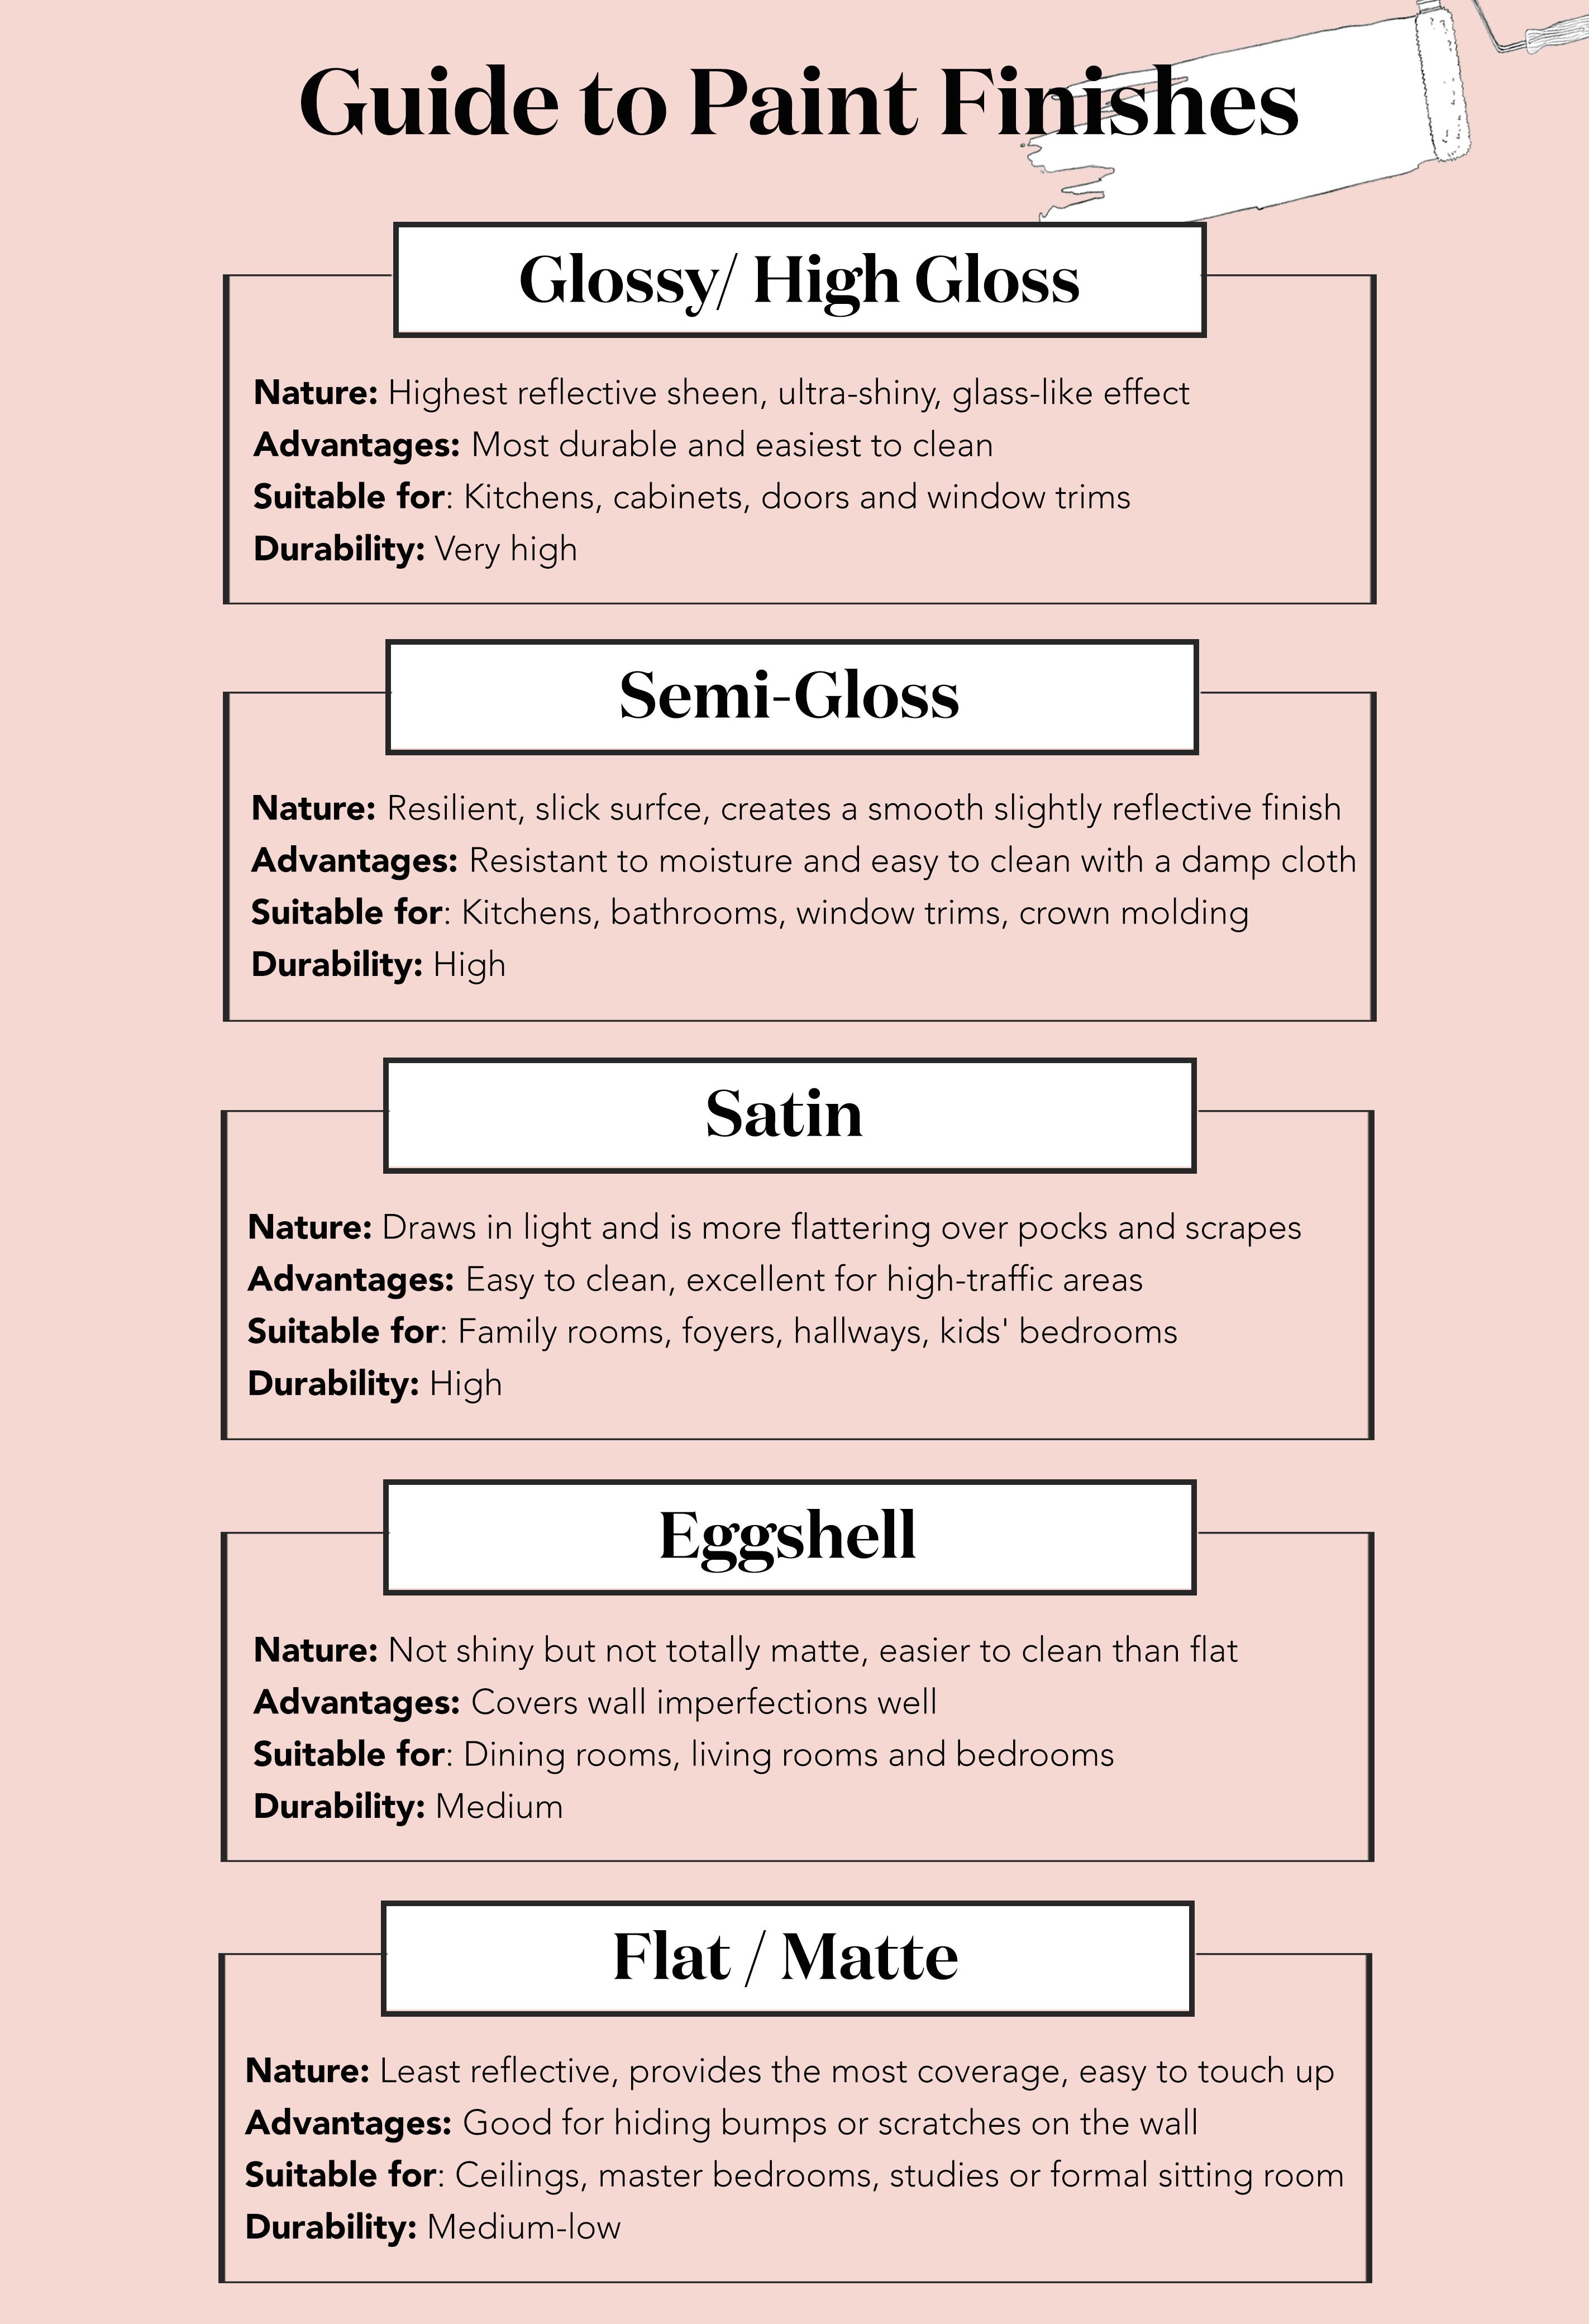 Different Types of Paints and Finishes